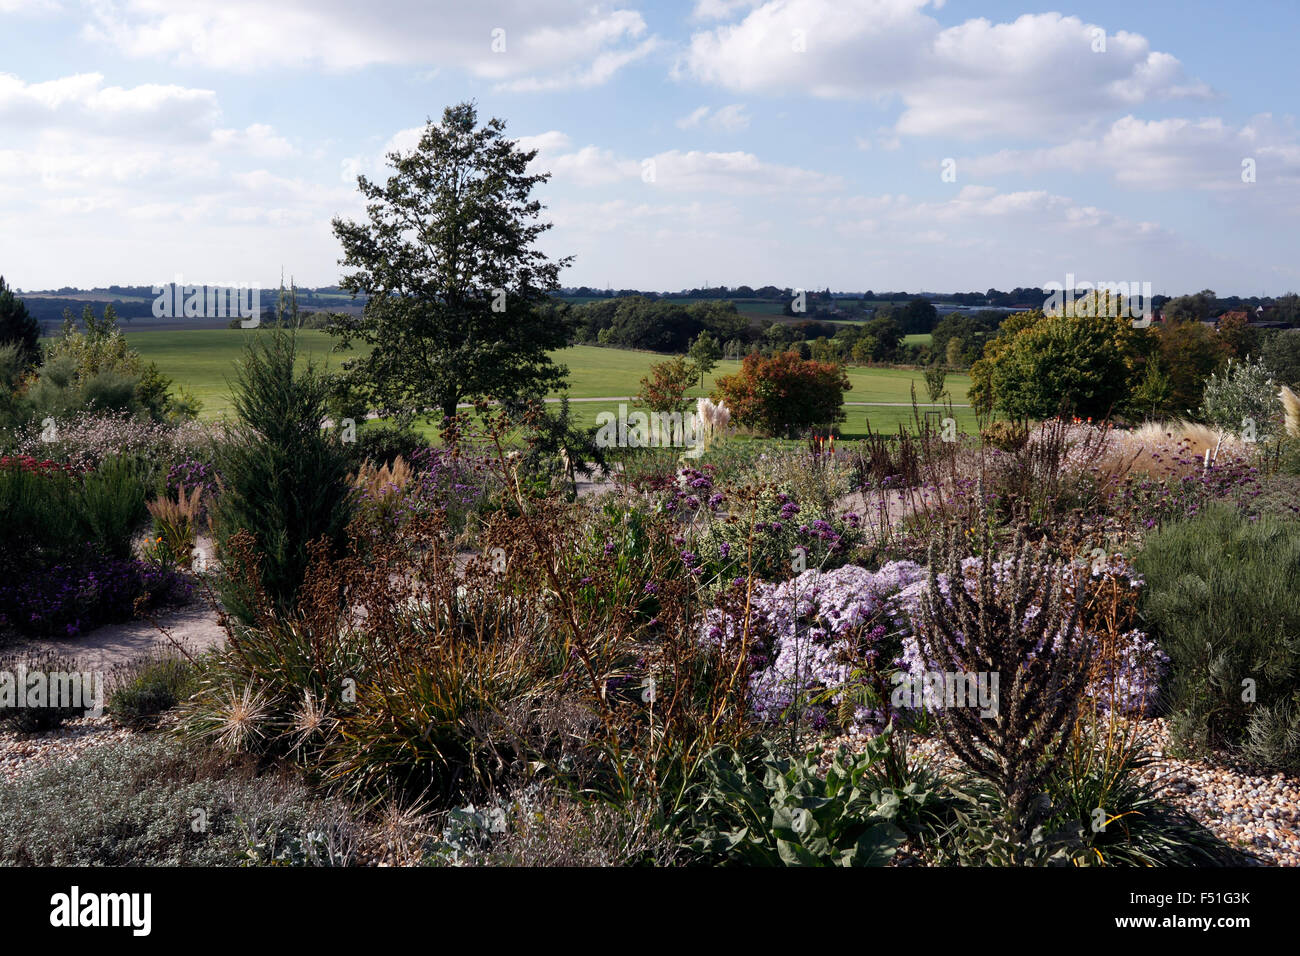 RHS HYDE HALL ESSEX. THE DRY GARDEN IN AUTUMN. UK. Stock Photo